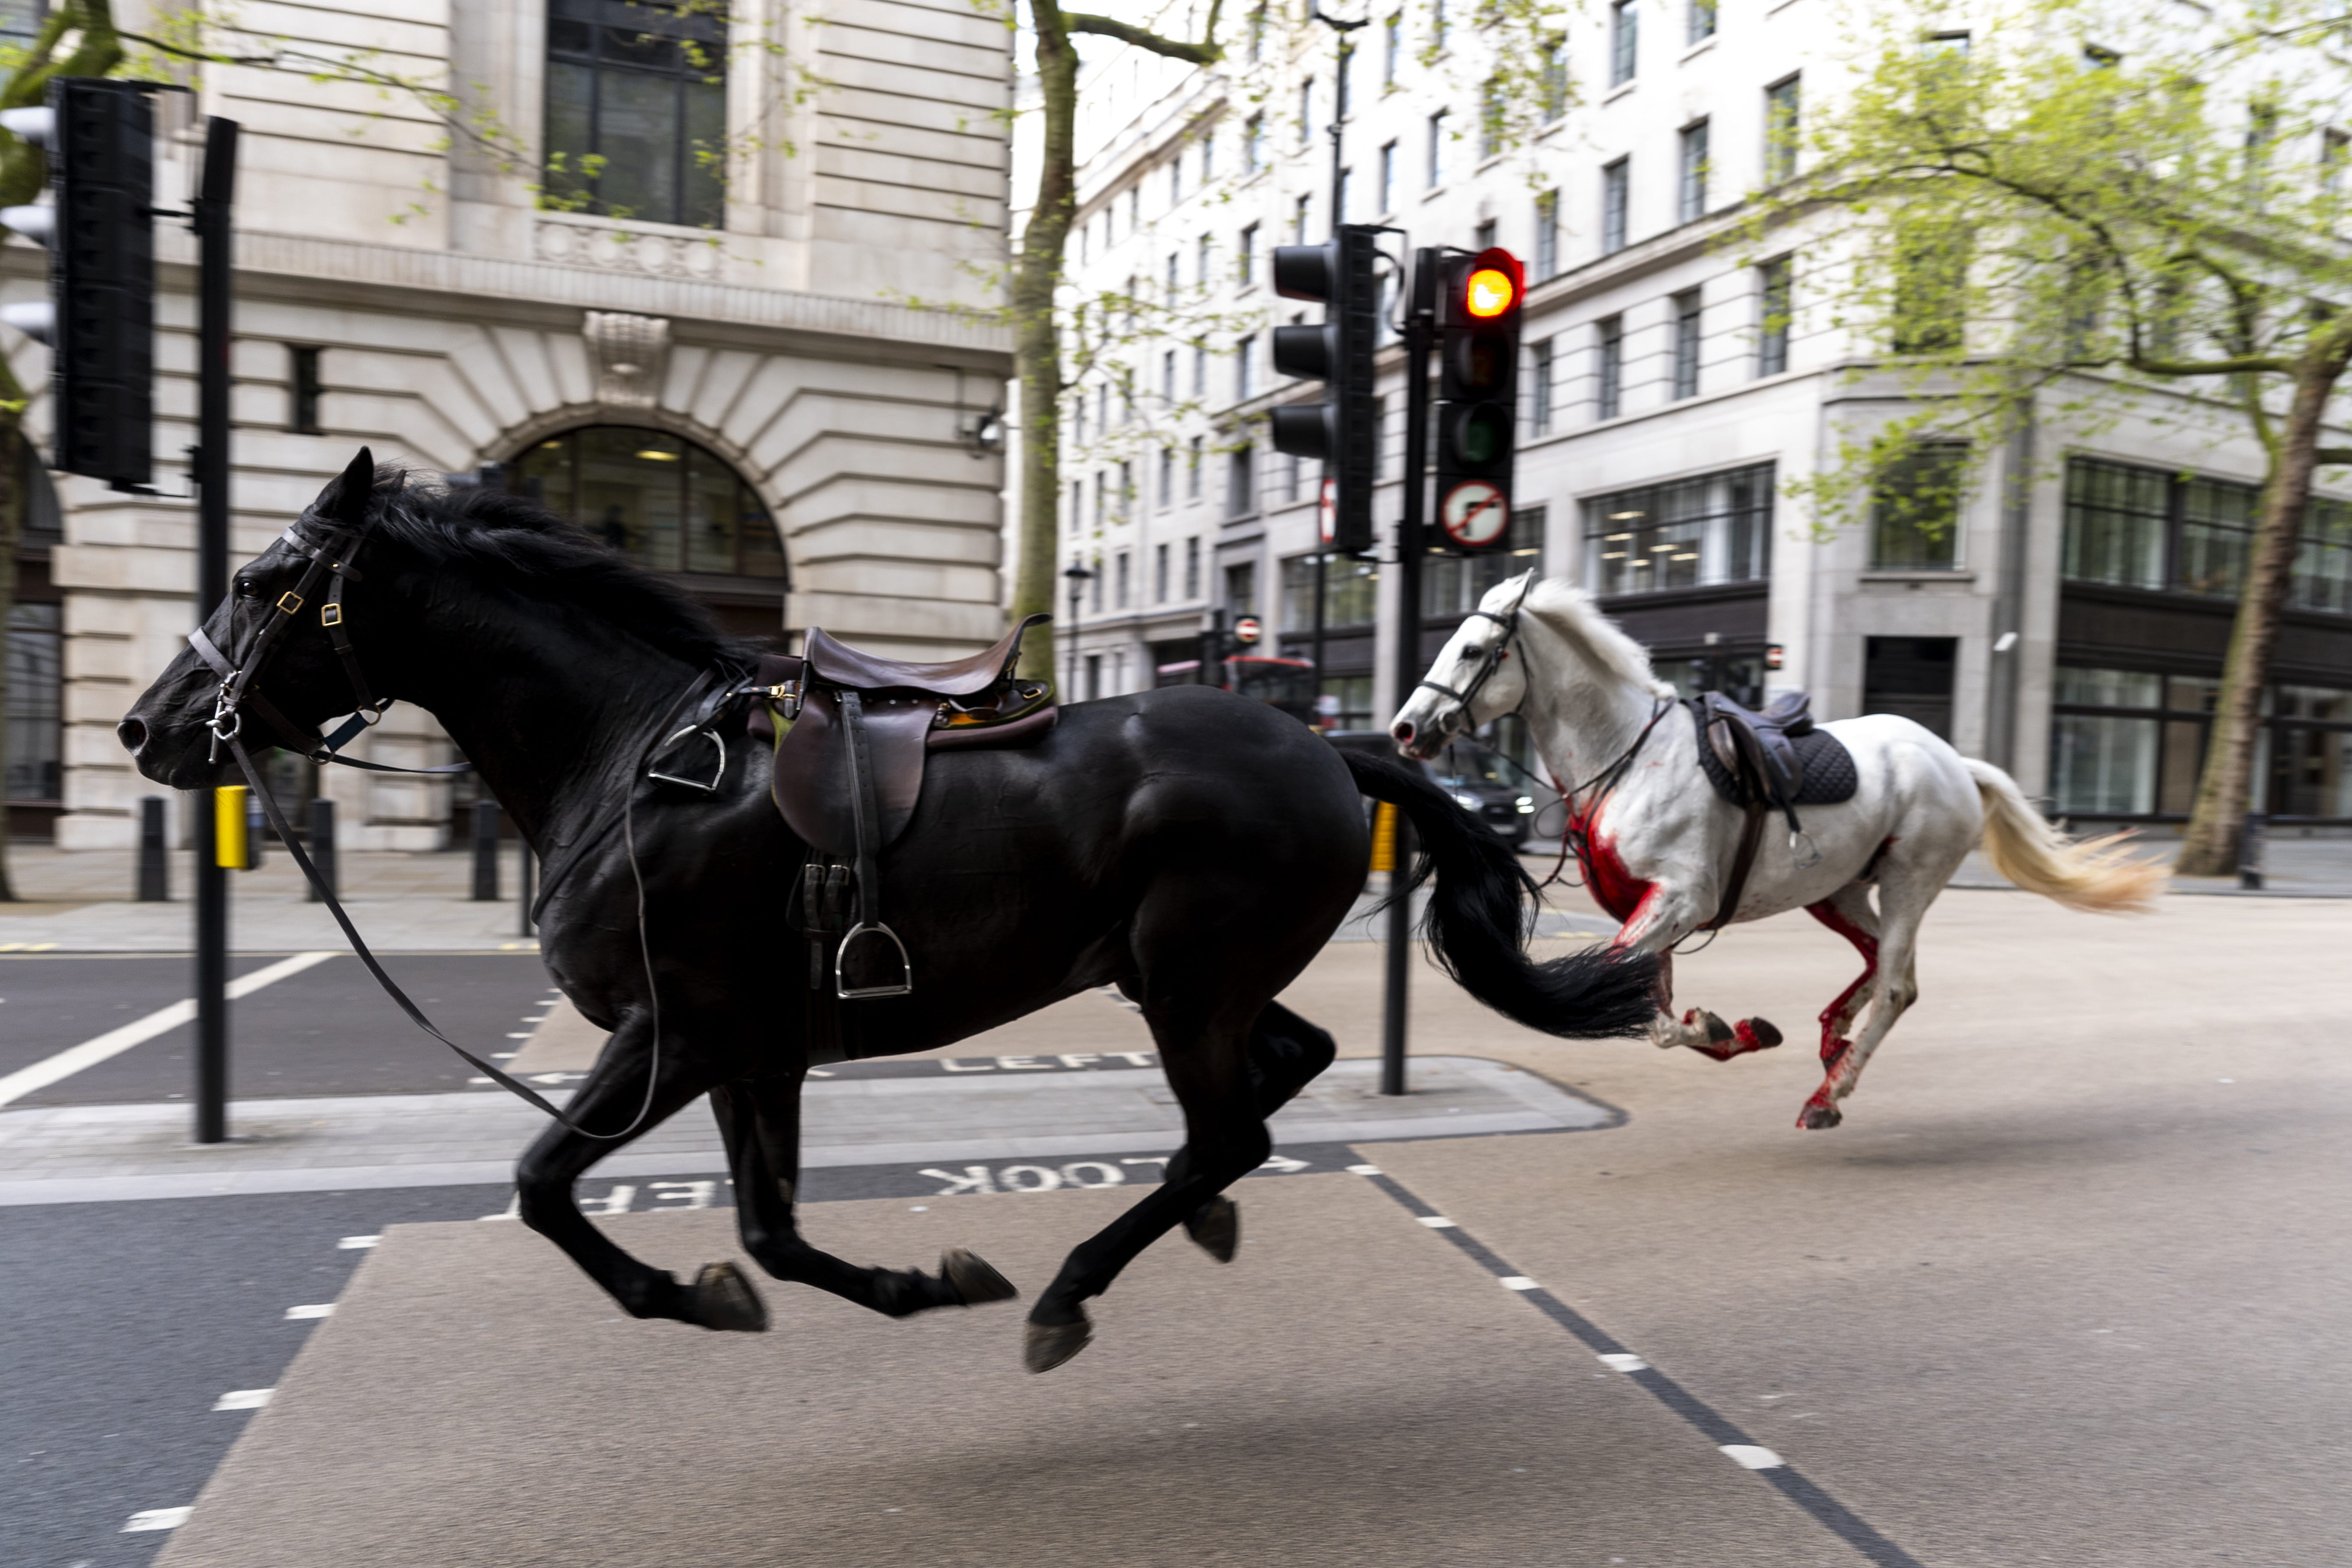 One of the horses was covered in blood as two of the animals galloped in the road near Aldwych (Jordan Pettitt/PA)